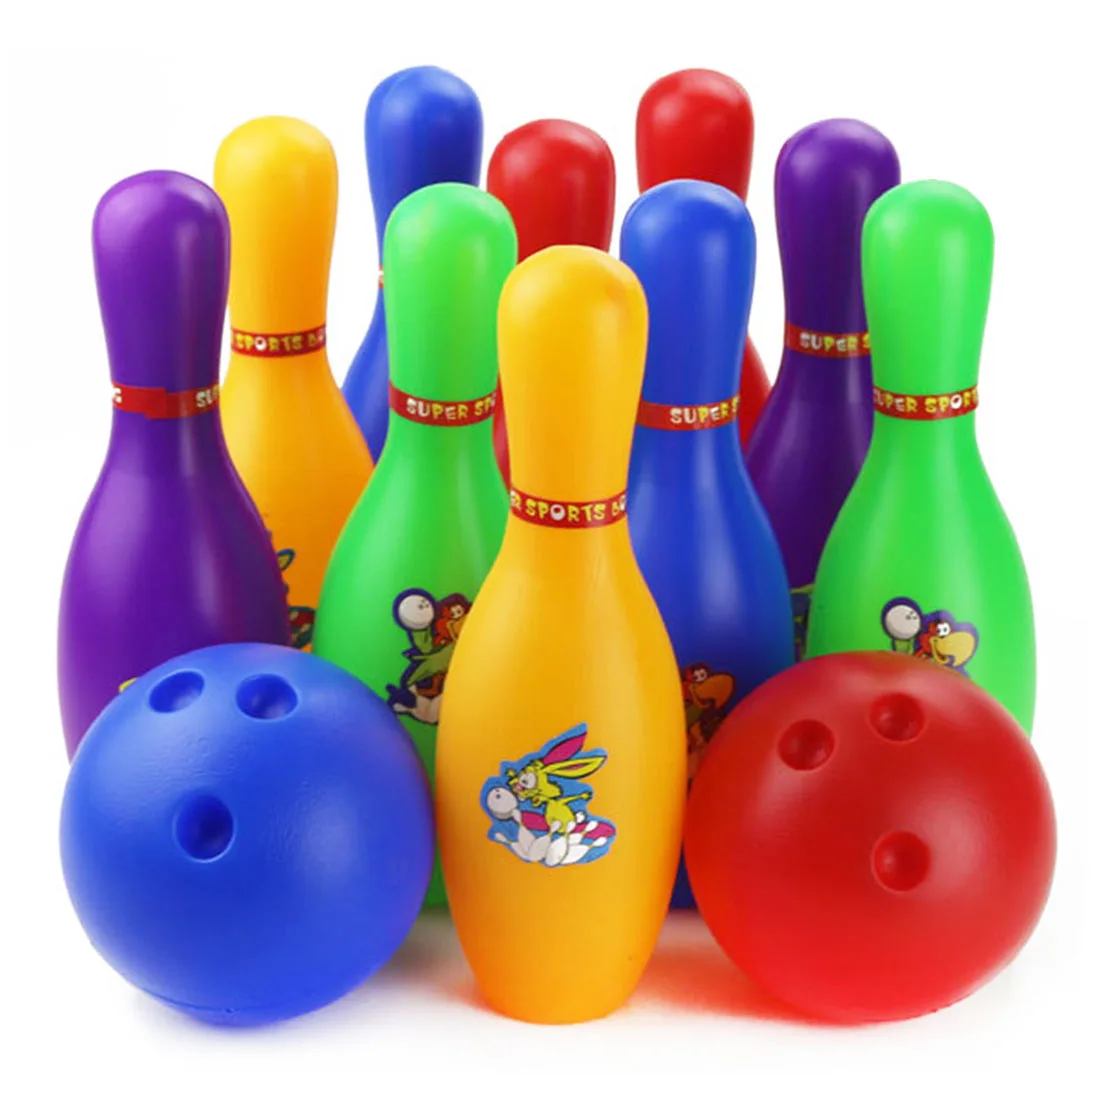 10 Pin Bowling Skittles 2 Balls Set Indoor & Outdoor Kids Family Game Brand new 